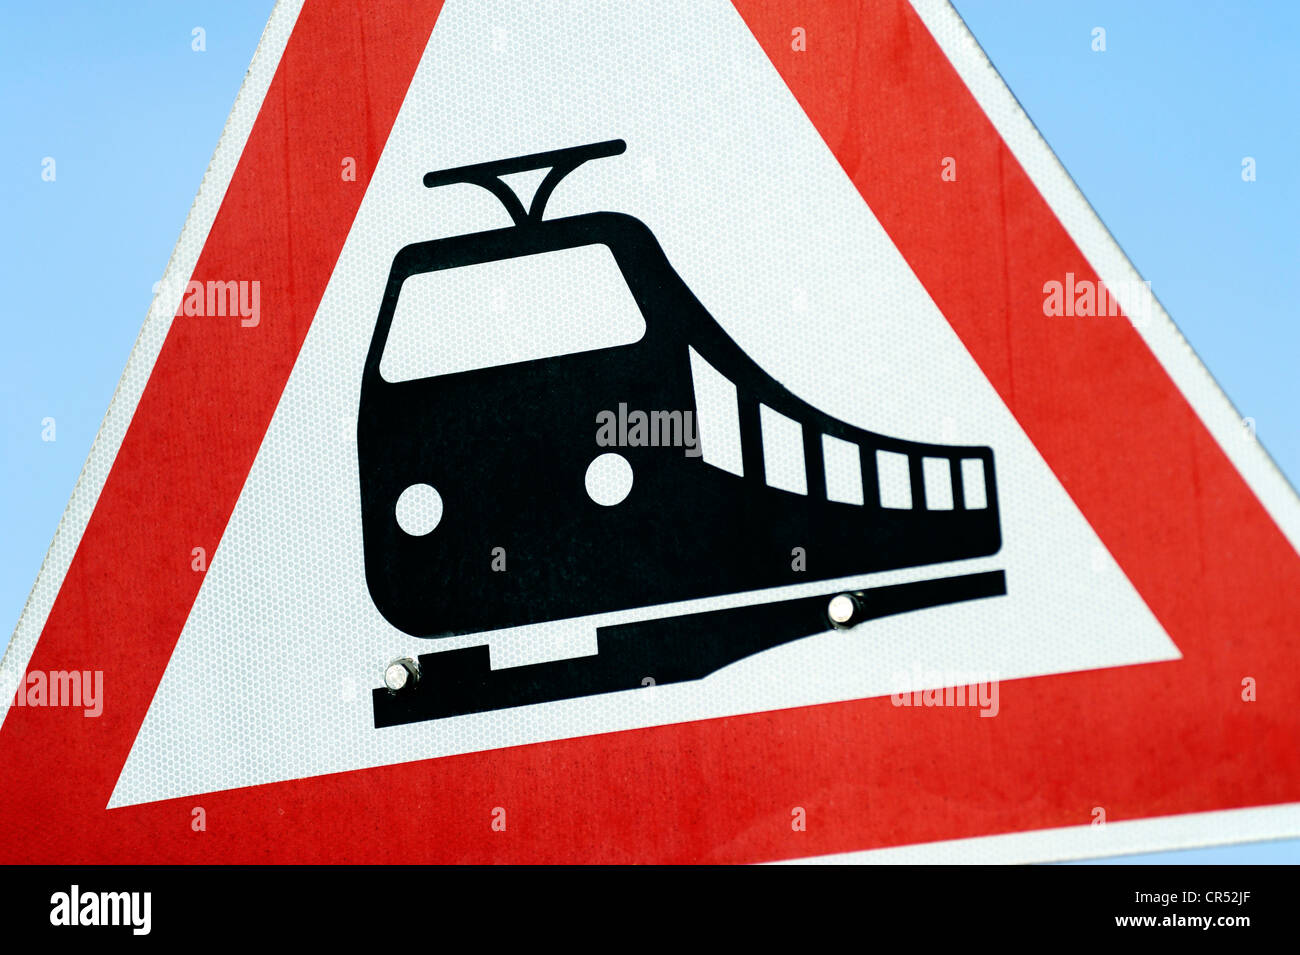 Road Sign Level Crossing Without Gate Or Barrier Ahead Give Priority To Rail Vehicles Stock Photo Alamy